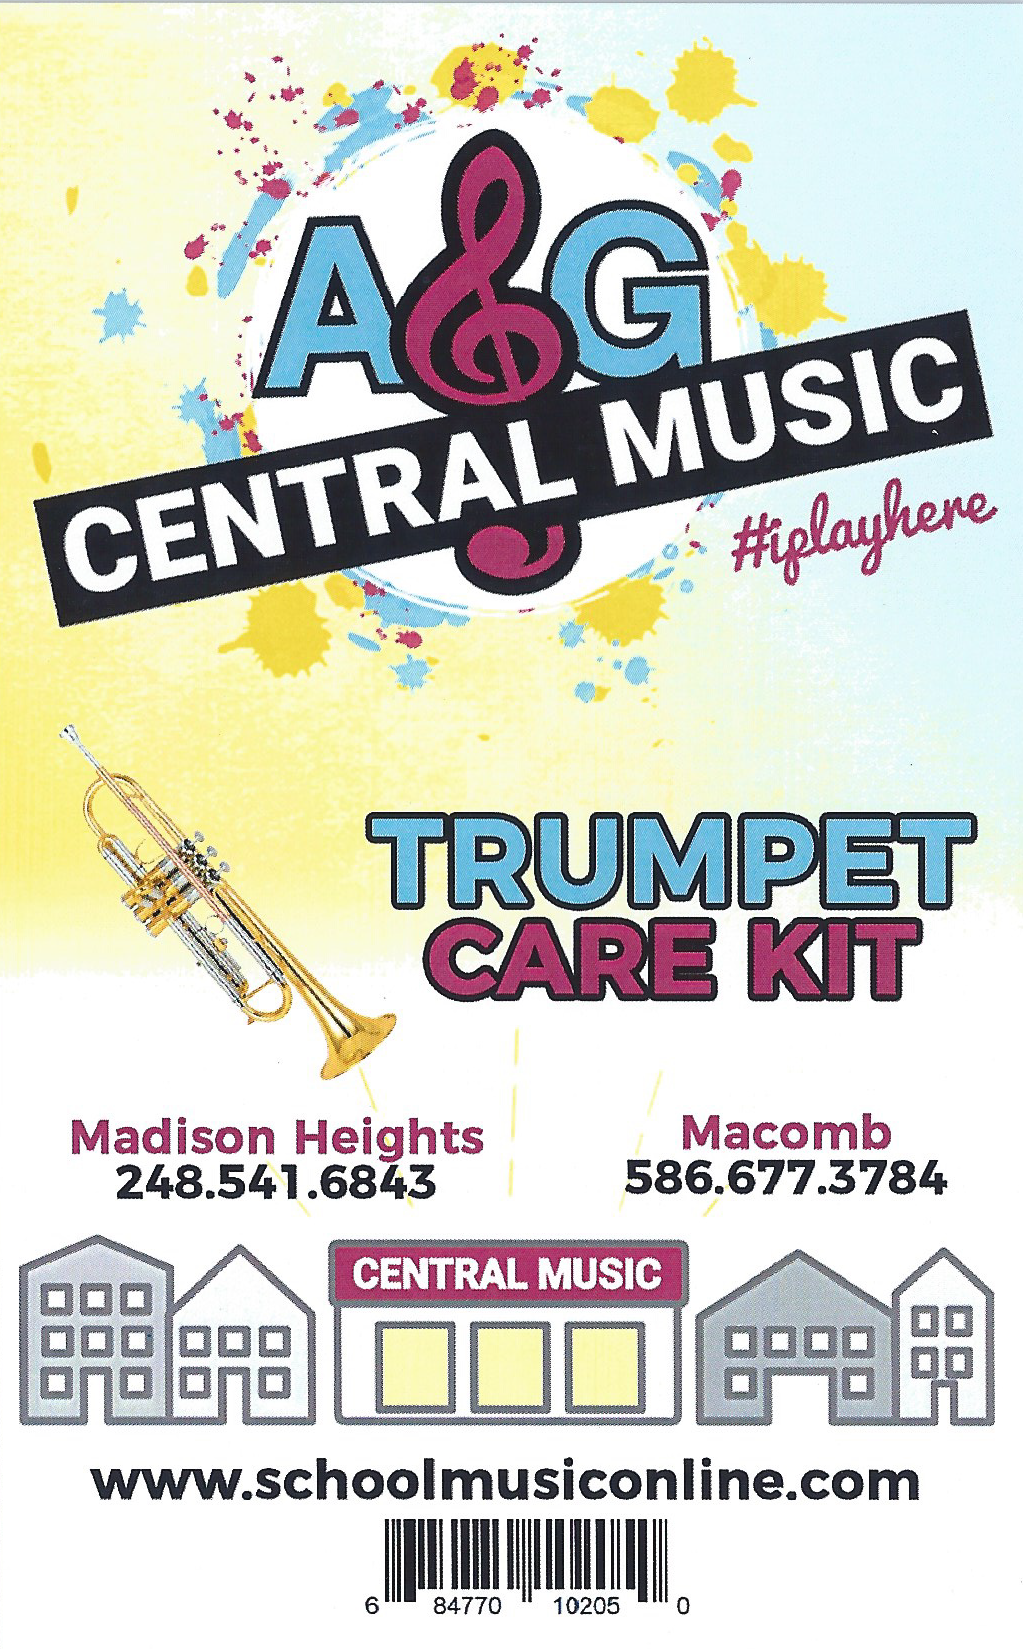 Trumpet Care Kit — A & G Central Music